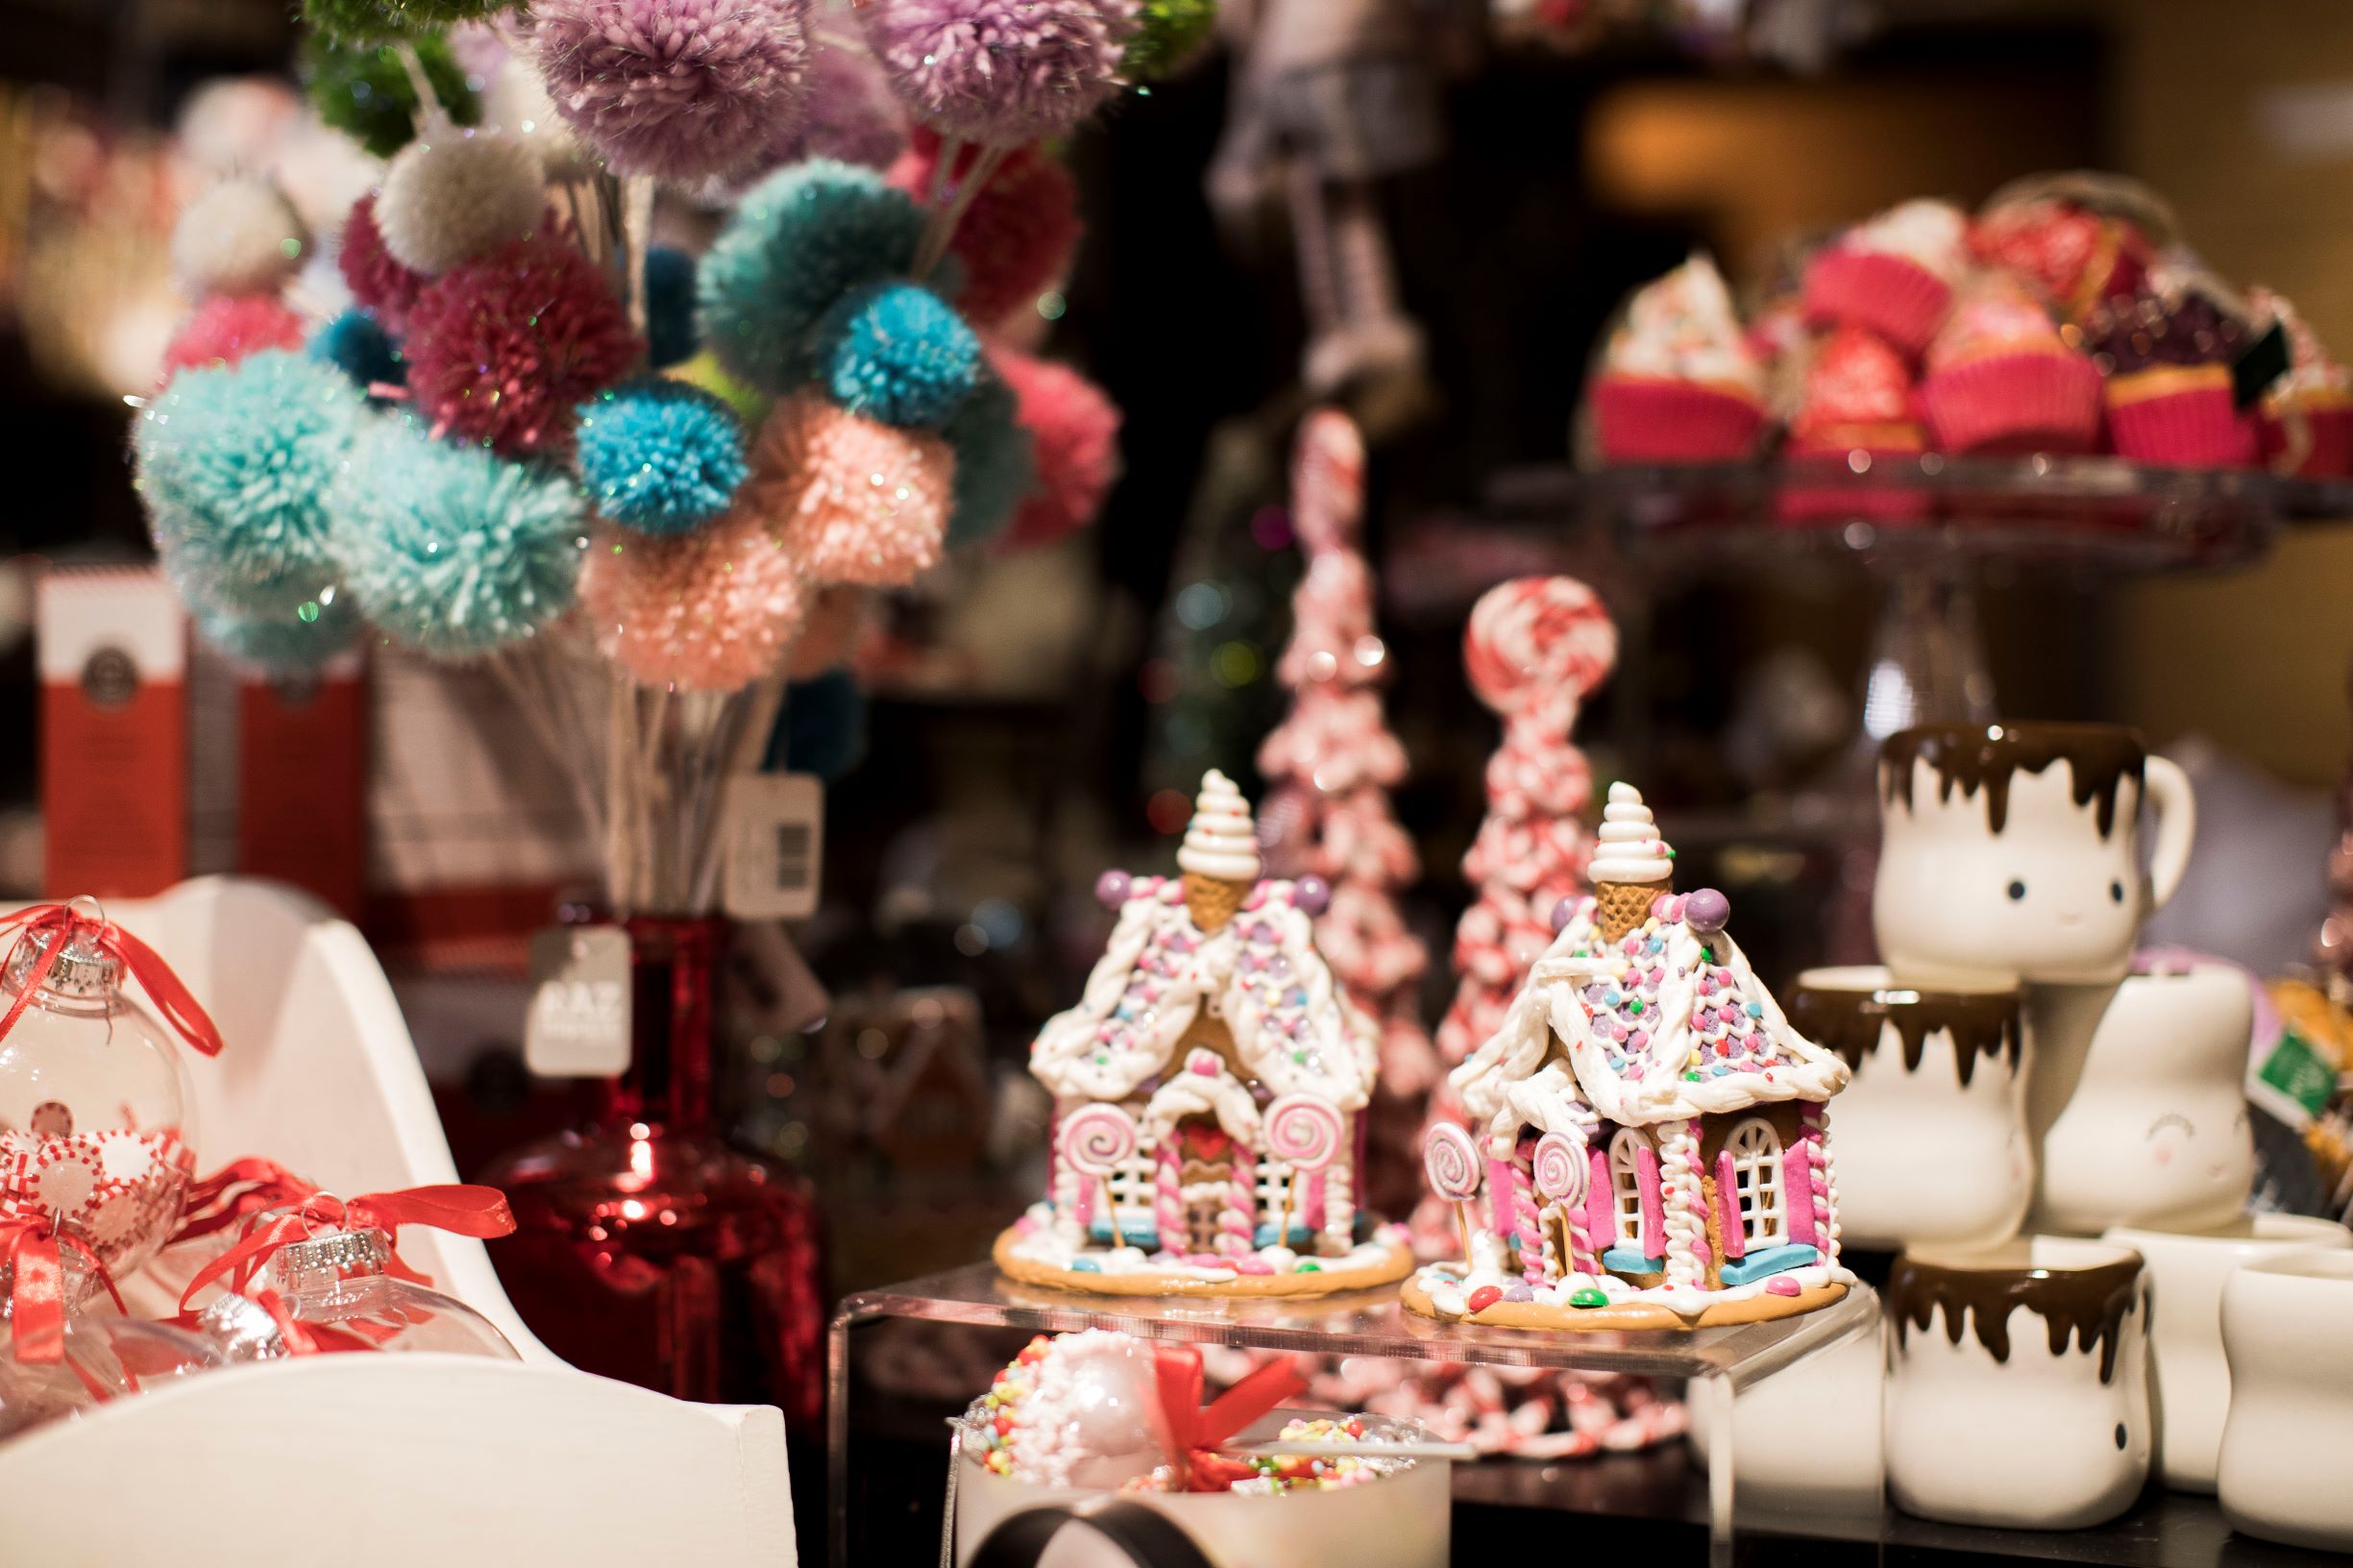 The Holiday Shop at Meadow Brook Hall